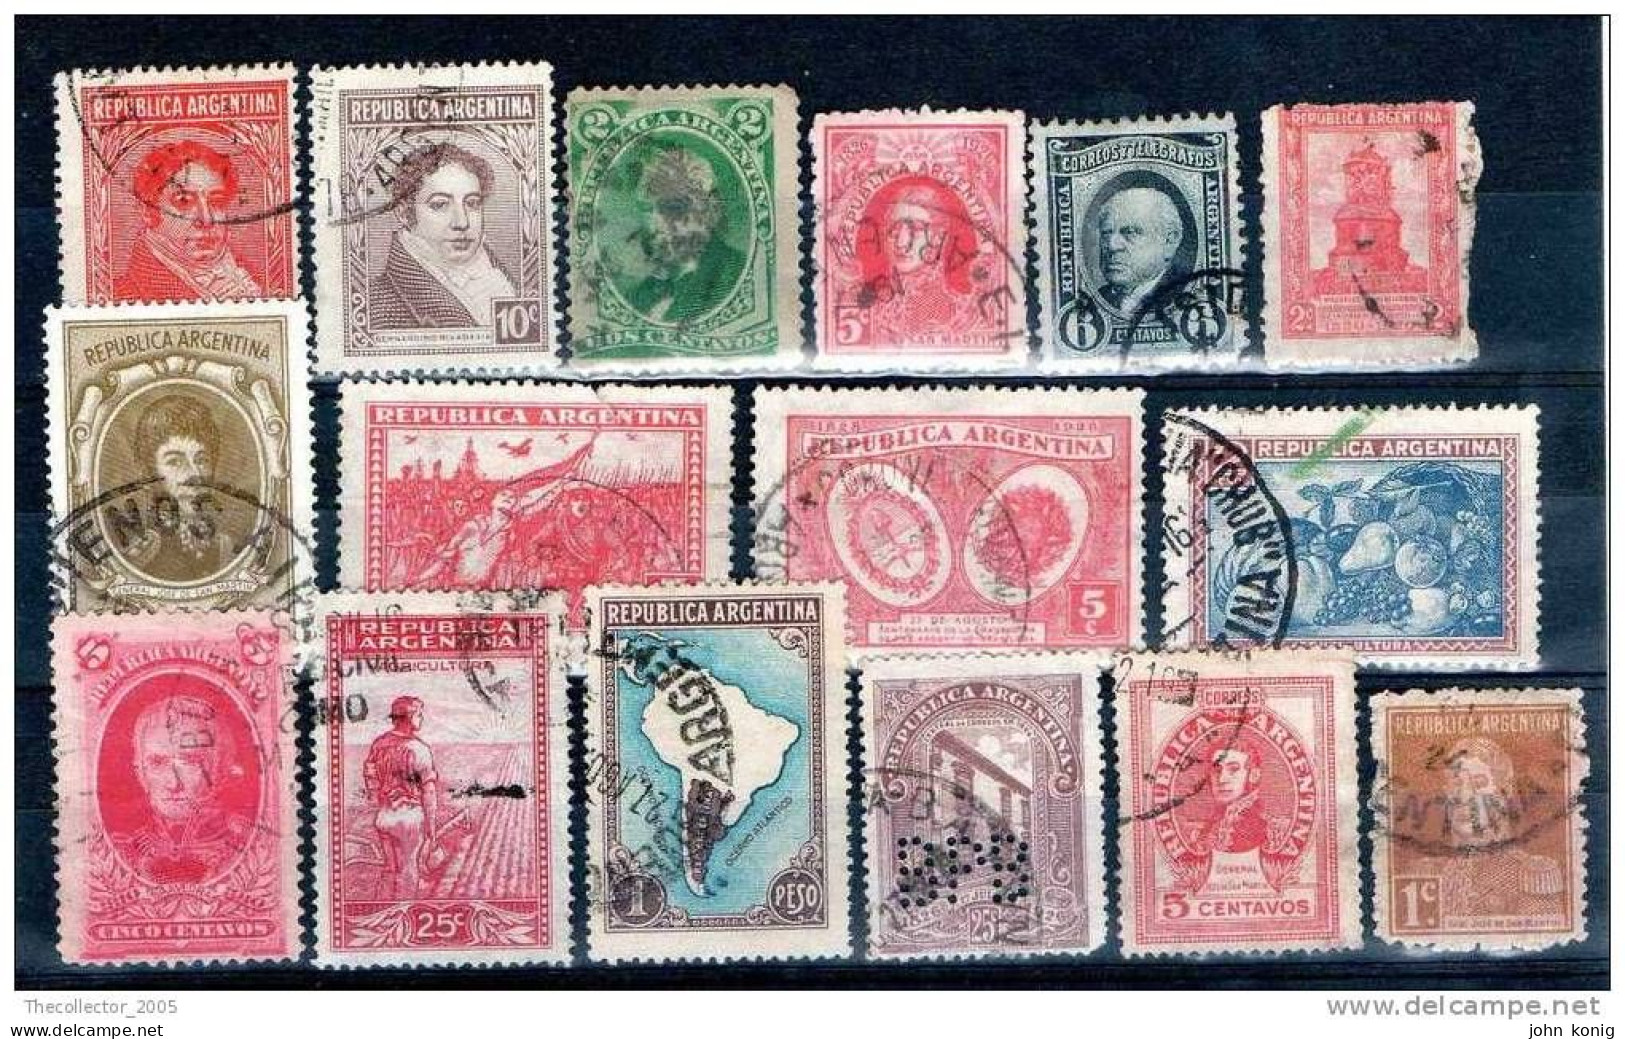 ARGENTINA - ARGENTINE - ARGENTINIEN - Stamps Lot - Lotto Usati - Used - Gestempeld - Collections, Lots & Séries